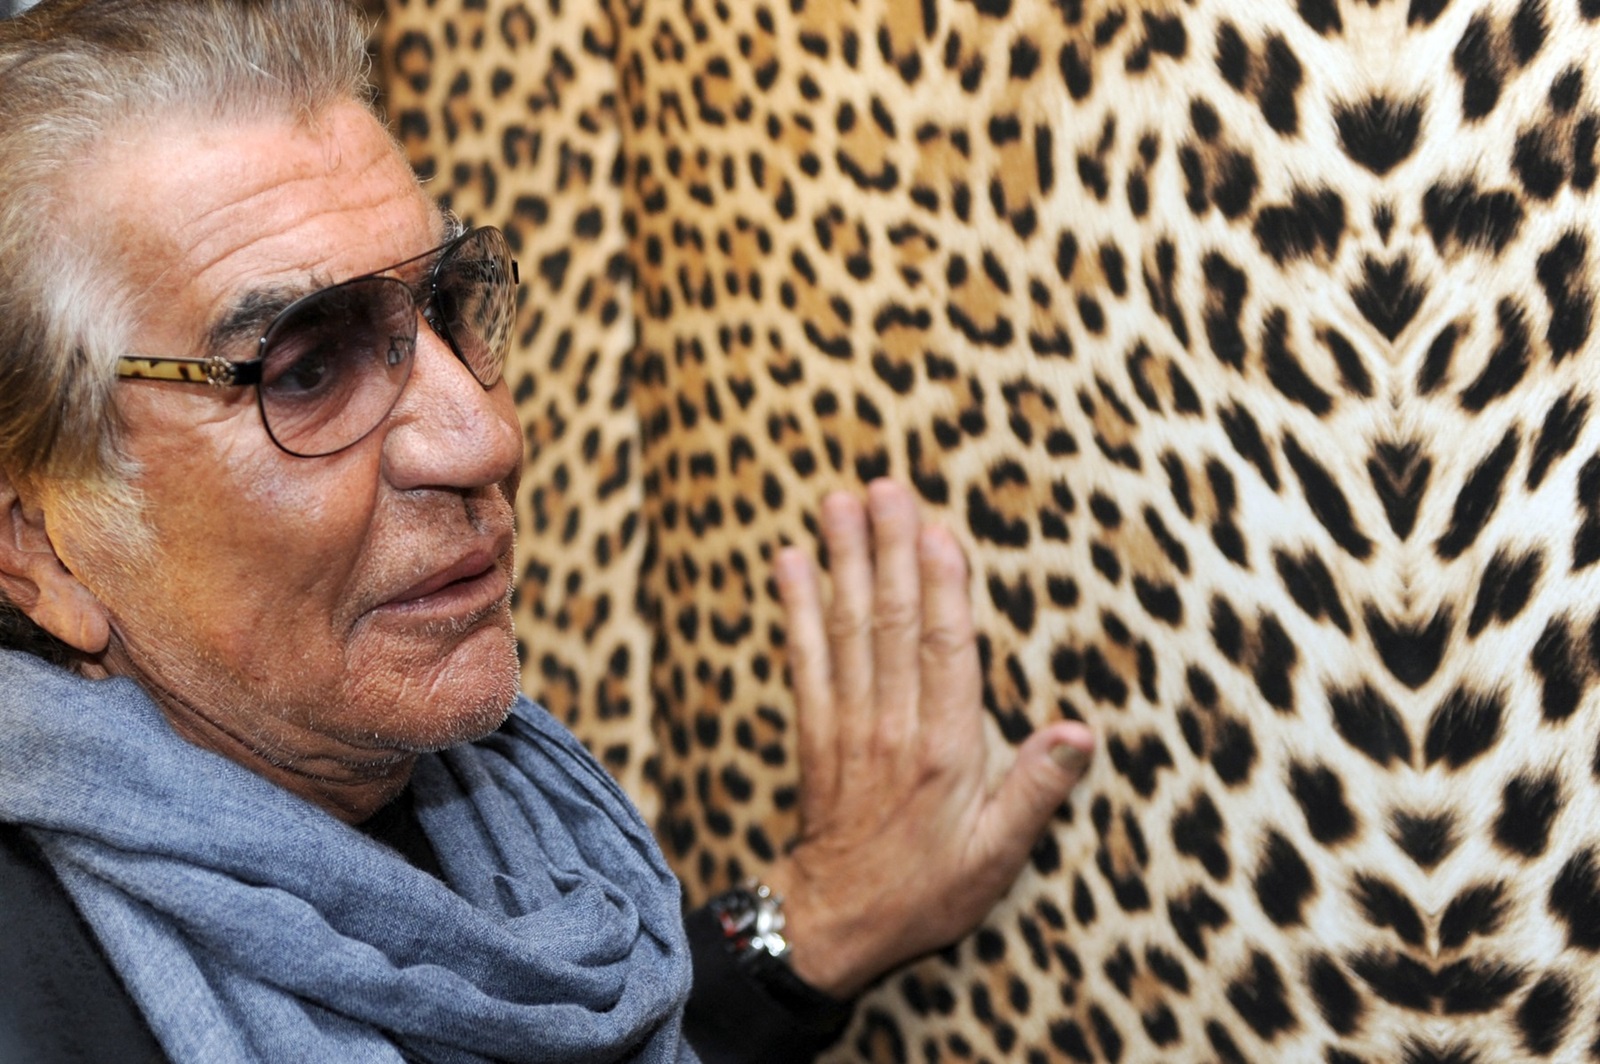 Italian designer Roberto Cavalli touches one of his prints during a press conference presenting his photography exhibition "il nero non e' mai assoluto" (black is never absolute) in Milan on November 17, 2010.,Image: 65461003, License: Rights-managed, Restrictions: , Model Release: no, Credit line: Giuseppe CACACE / AFP / Profimedia